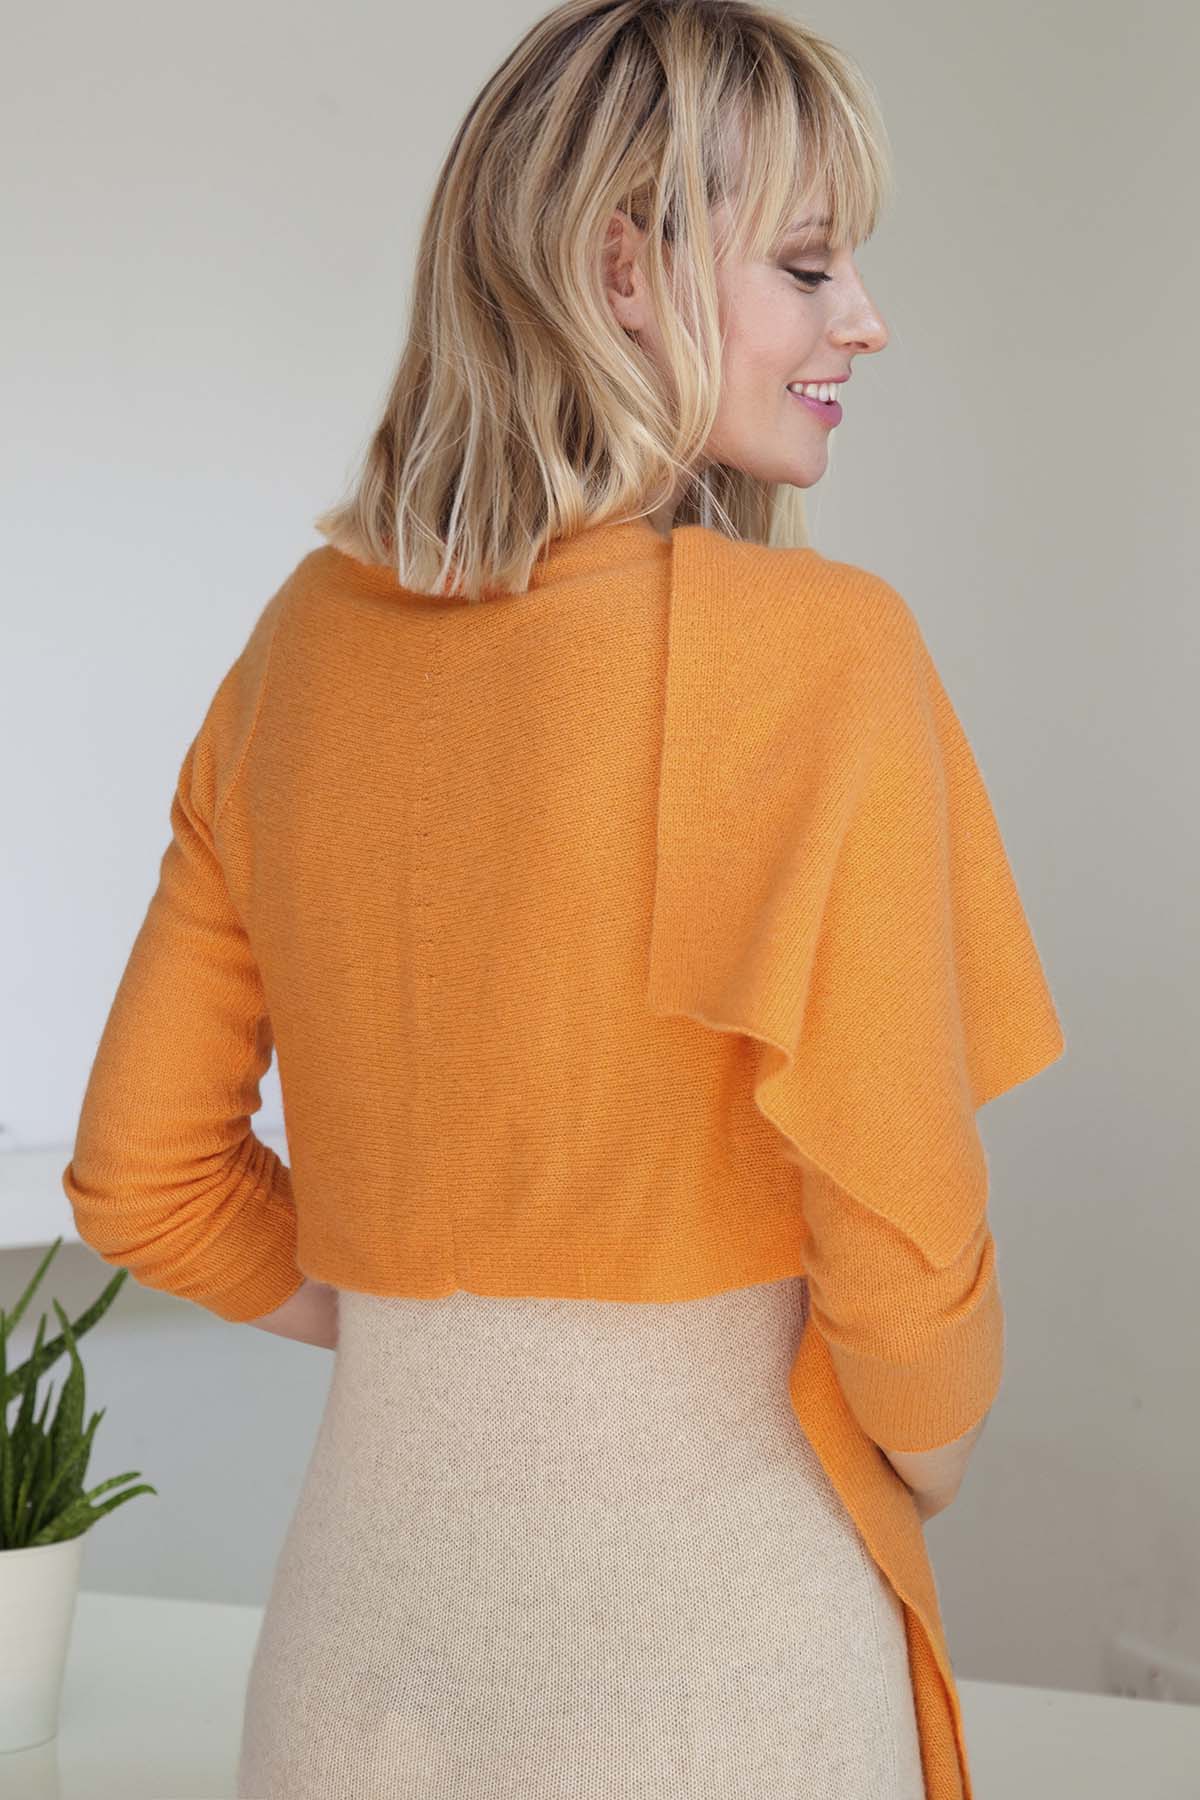 Long front lightweight cashmere wrap cardigan in Bright orange